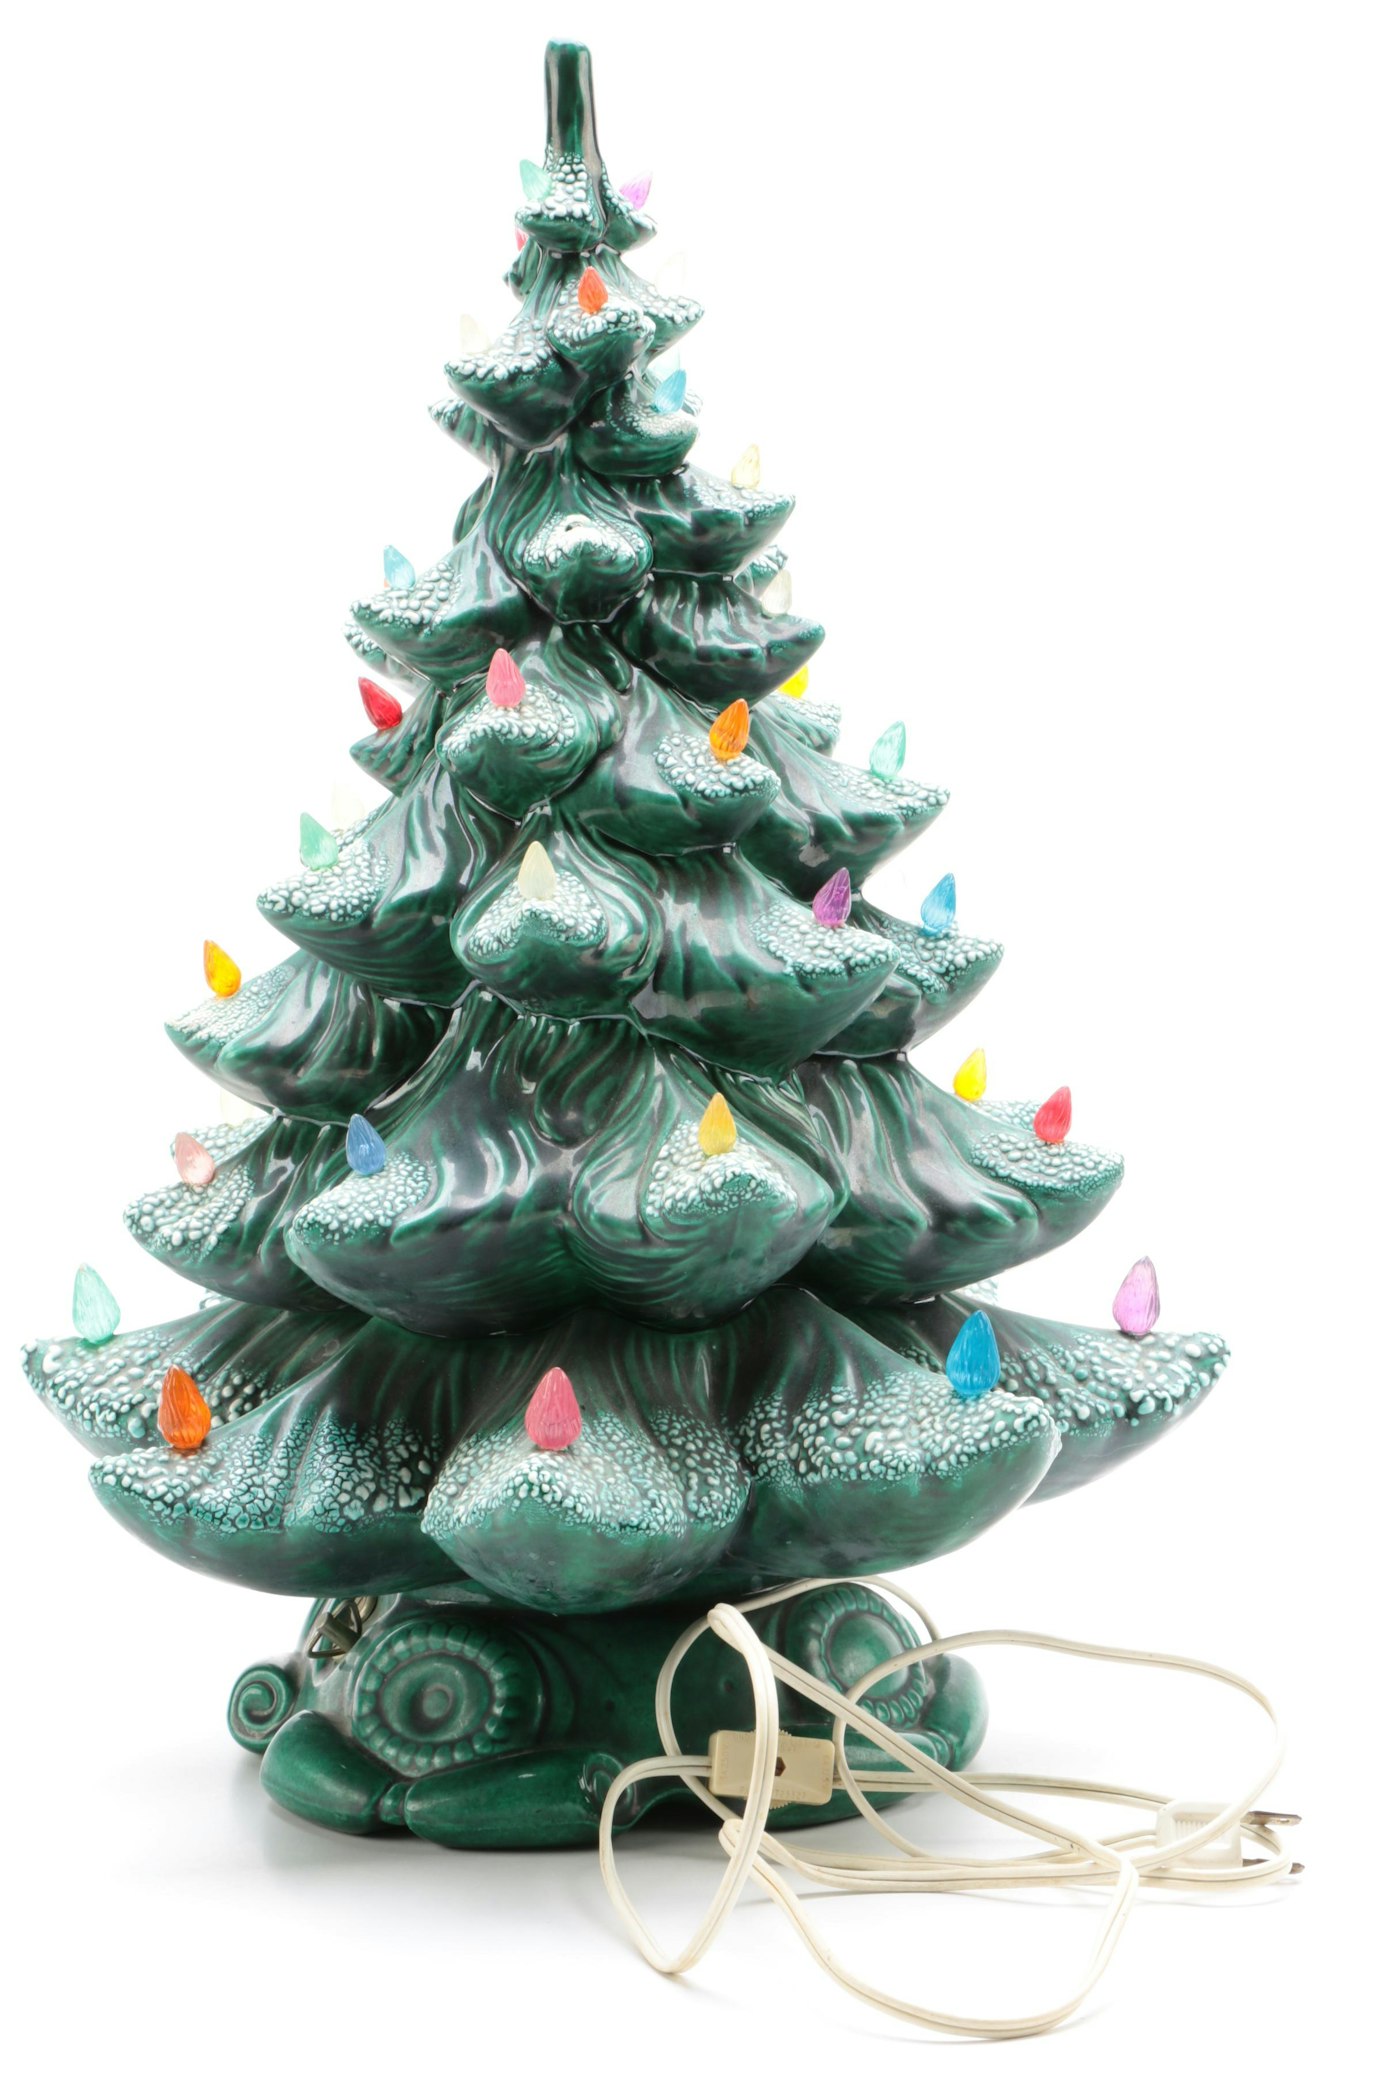 Ceramic Light Up Christmas Tree With a Music Box in the Base | EBTH